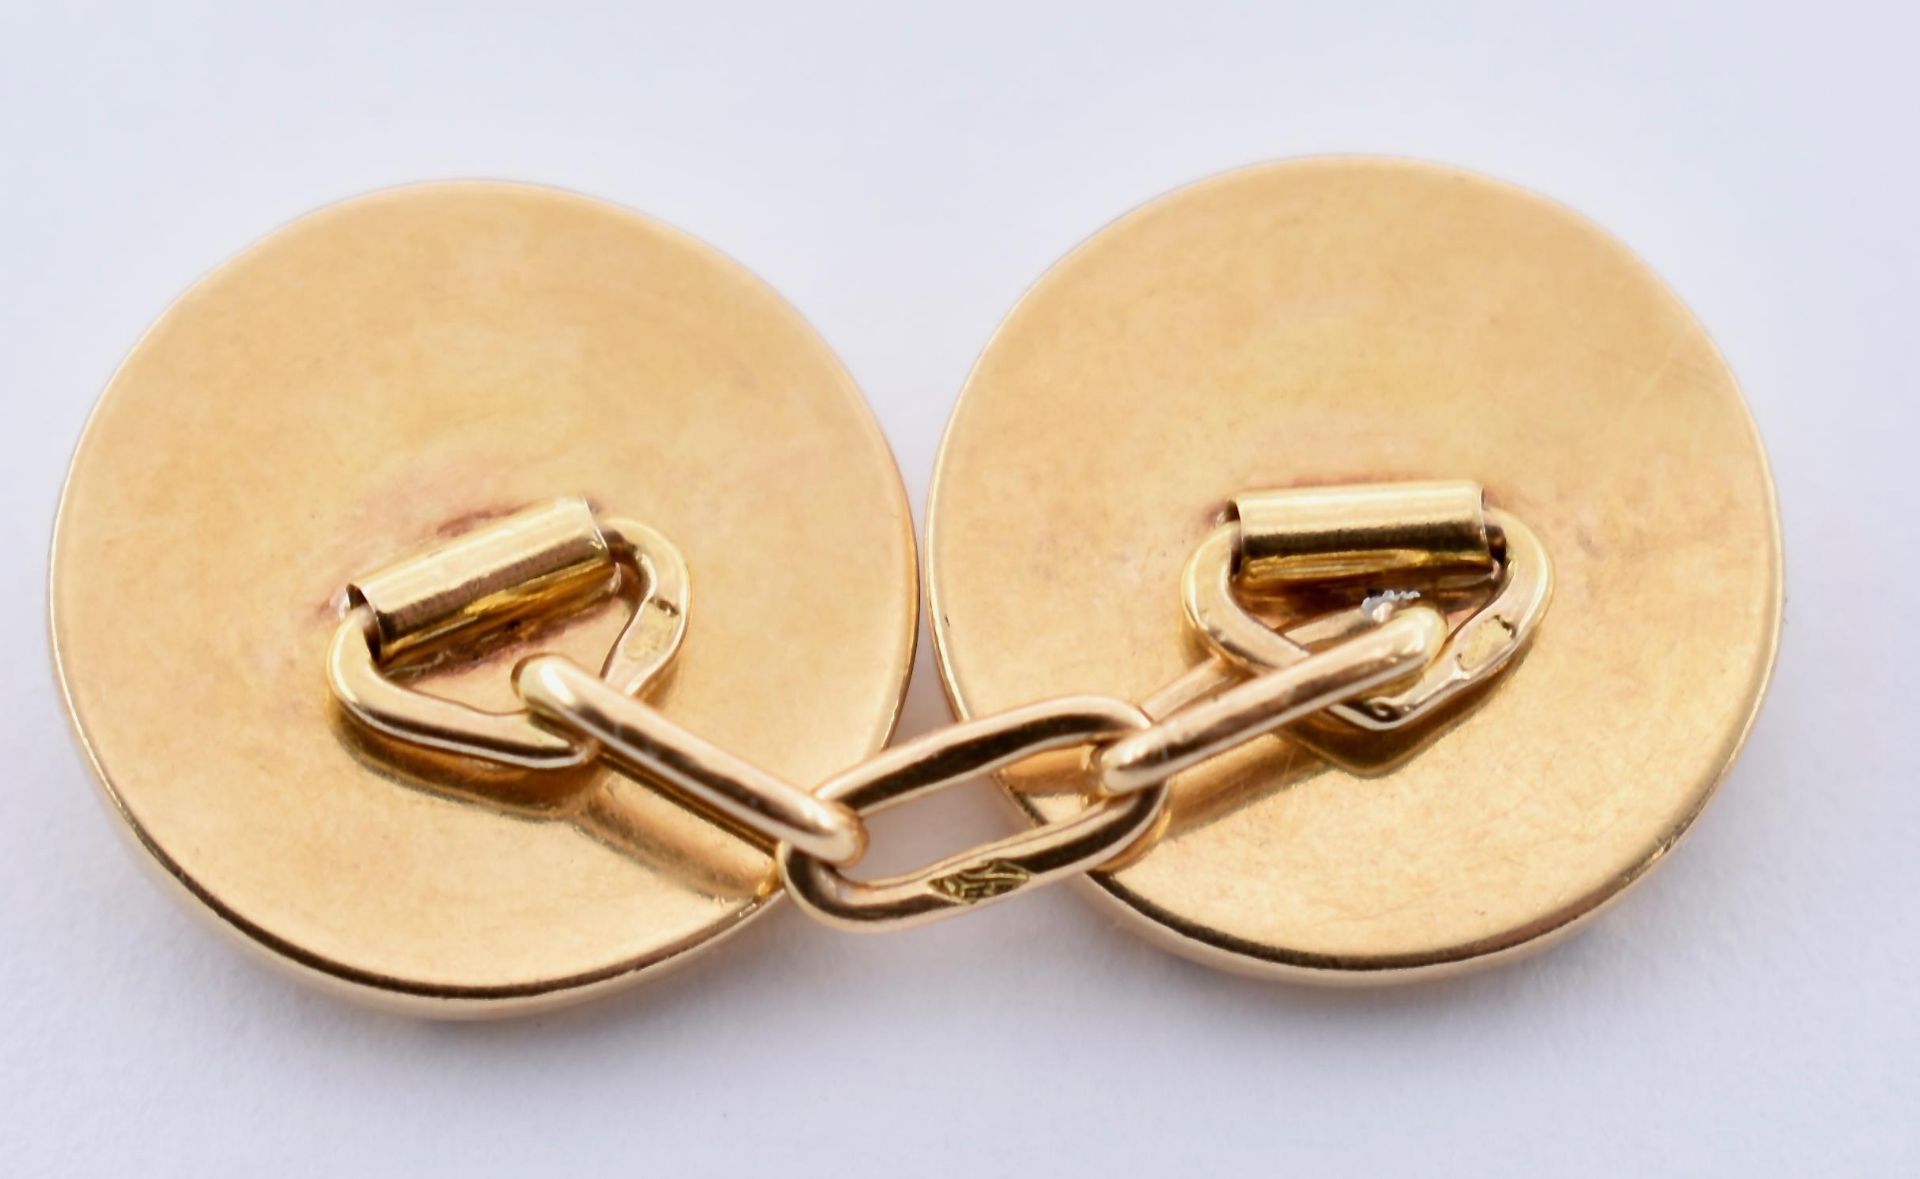 18CT GOLD FRENCH ART DECO CUFFLINKS - Image 4 of 6